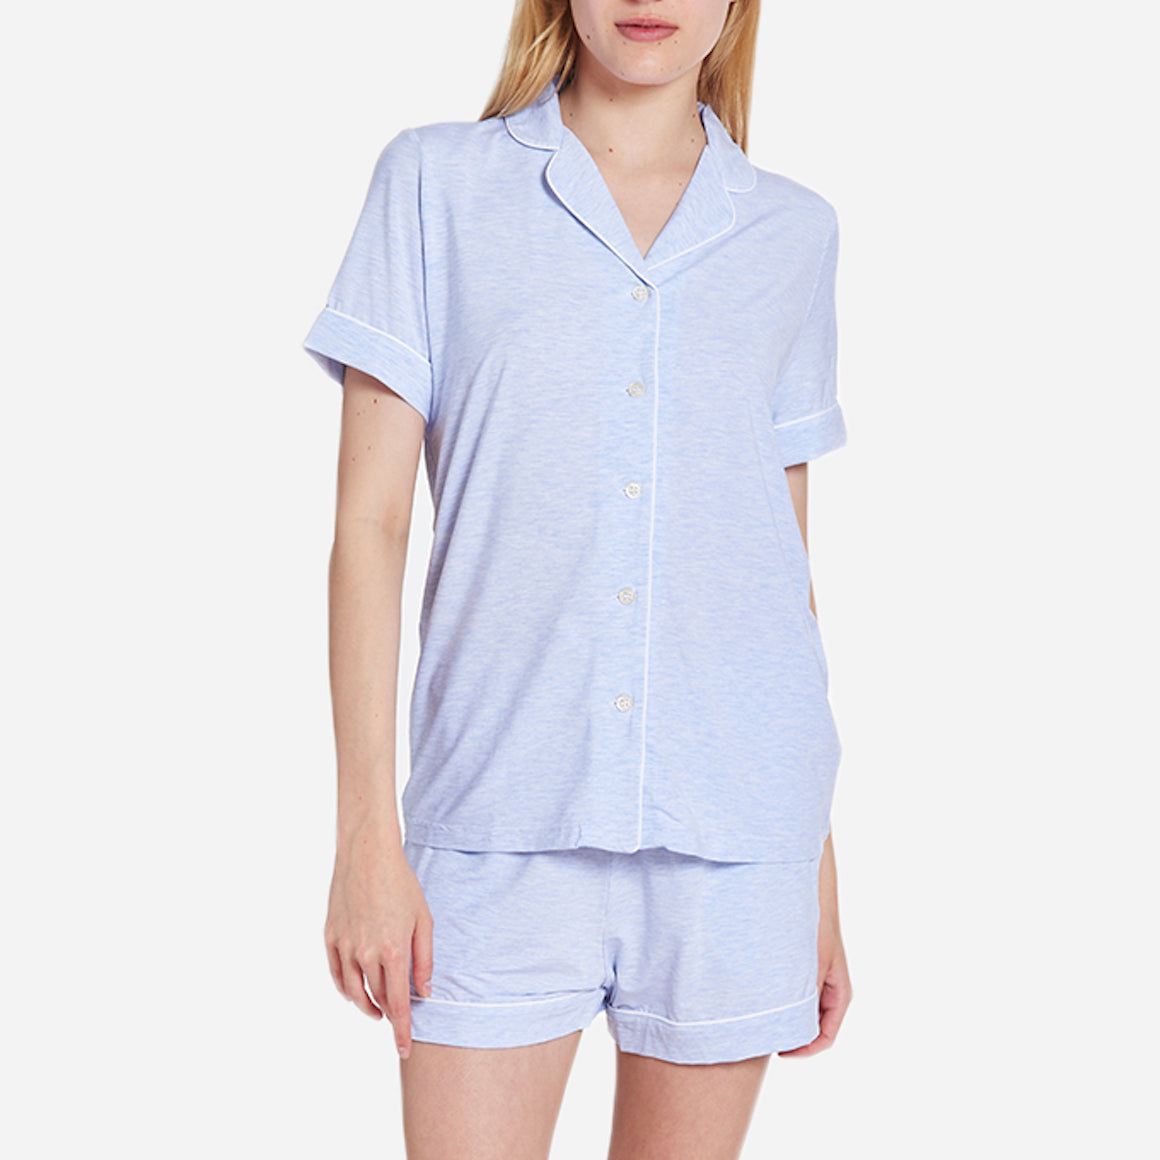 Front-facing model wearing a light blue short sleeve top and bottom pajama set.